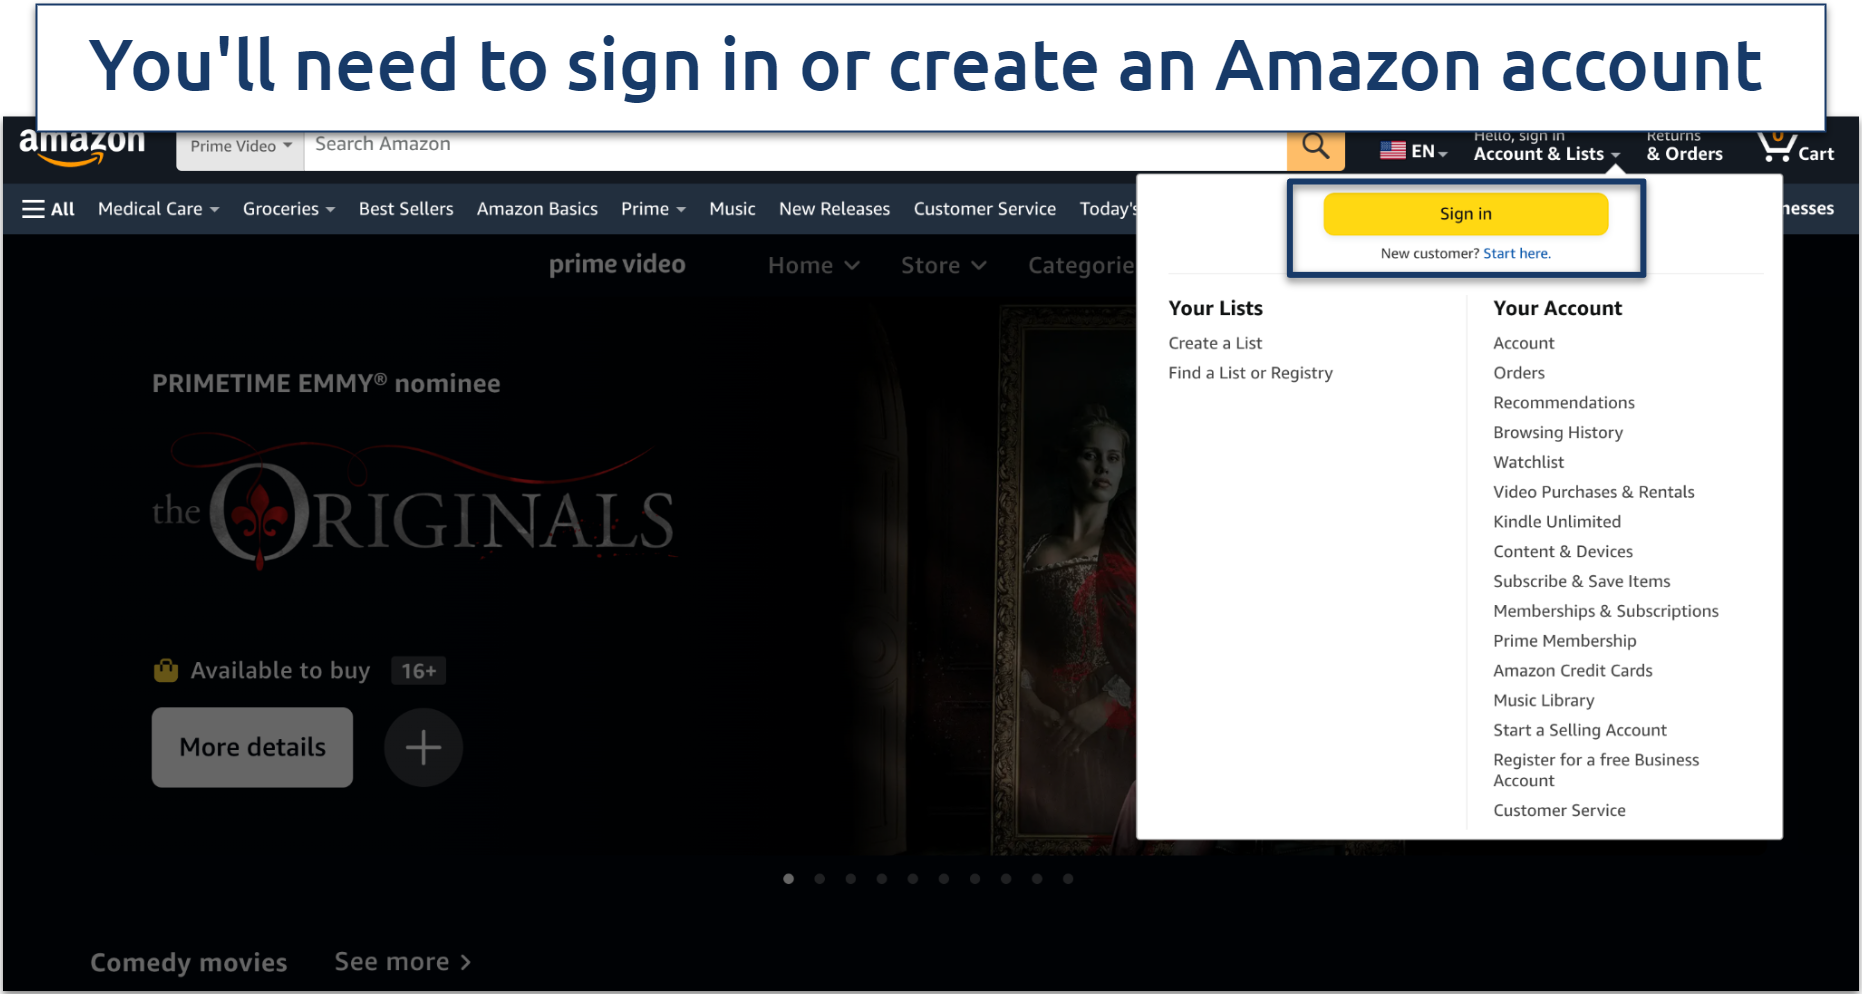 Screenshot of the Amazon sign in page